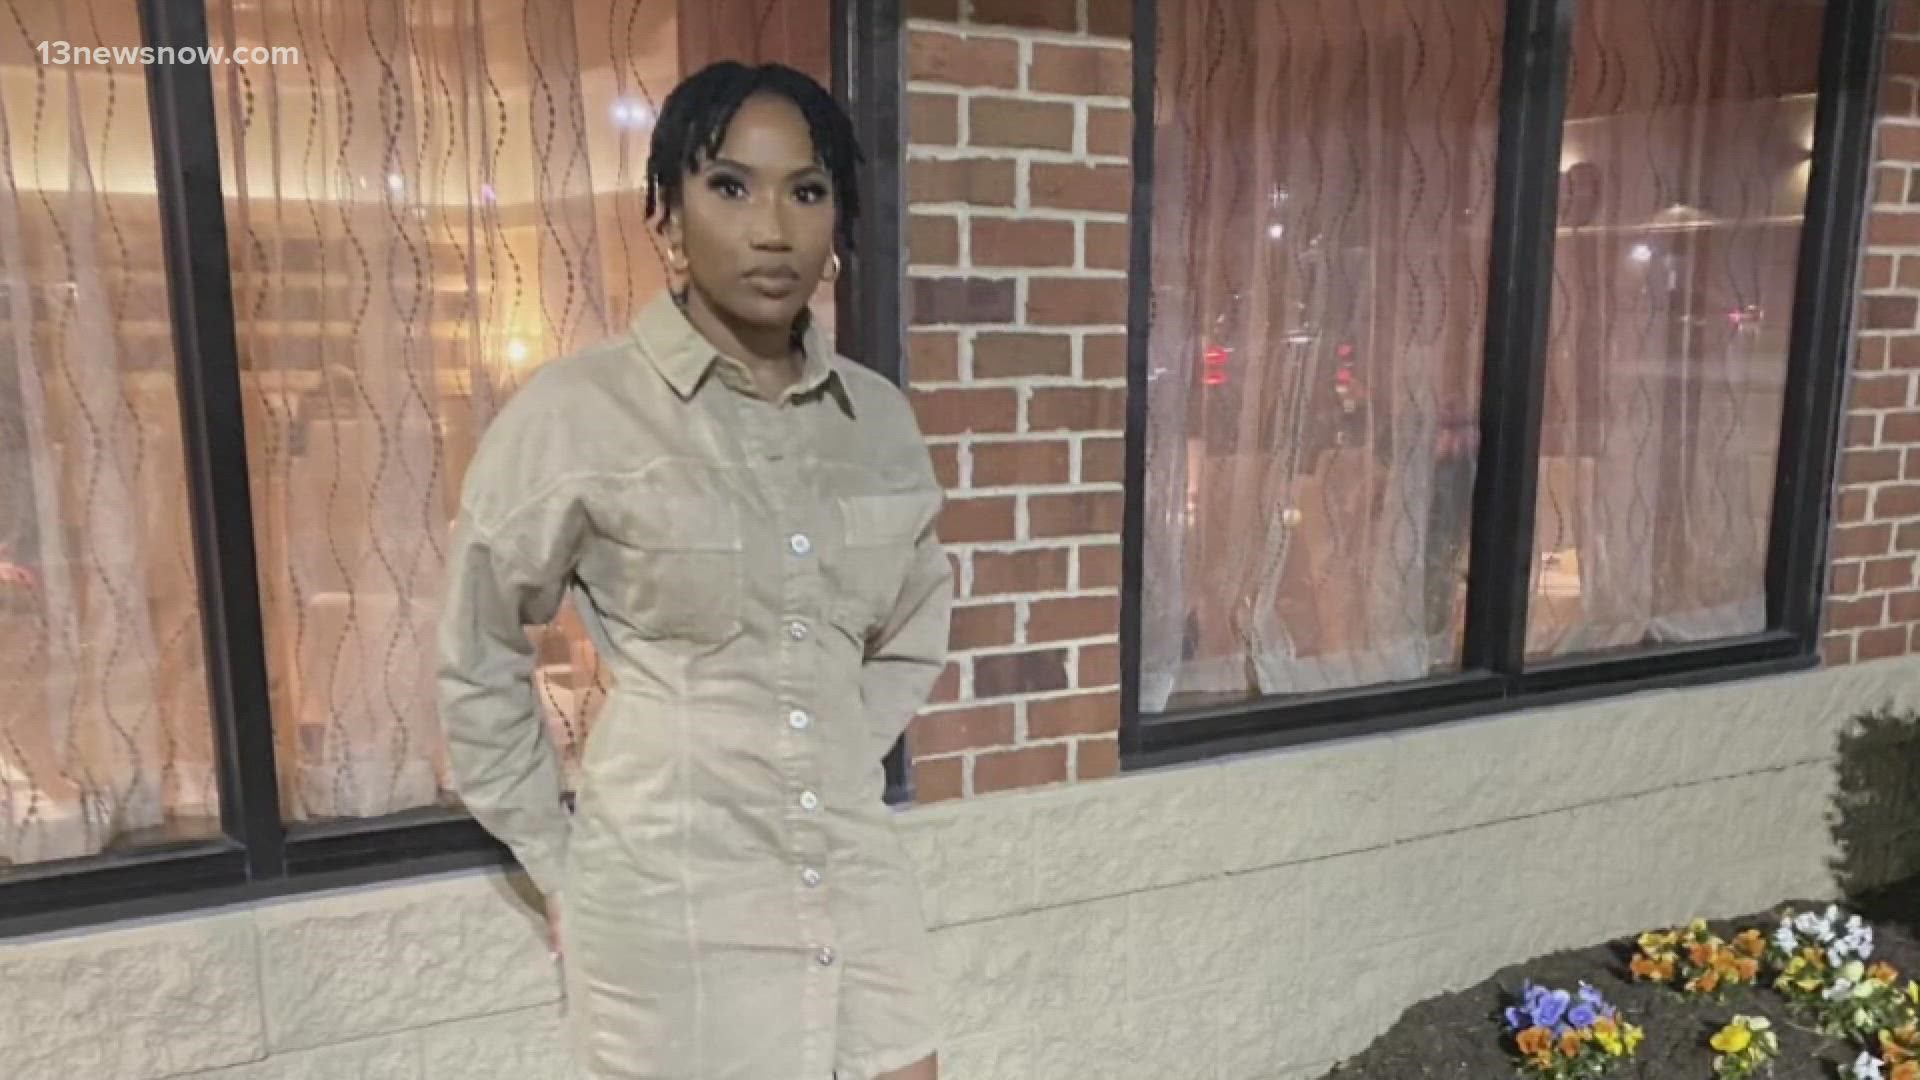 Family members of 25-year-old Sierra Jenkins confirm she died at the hospital.